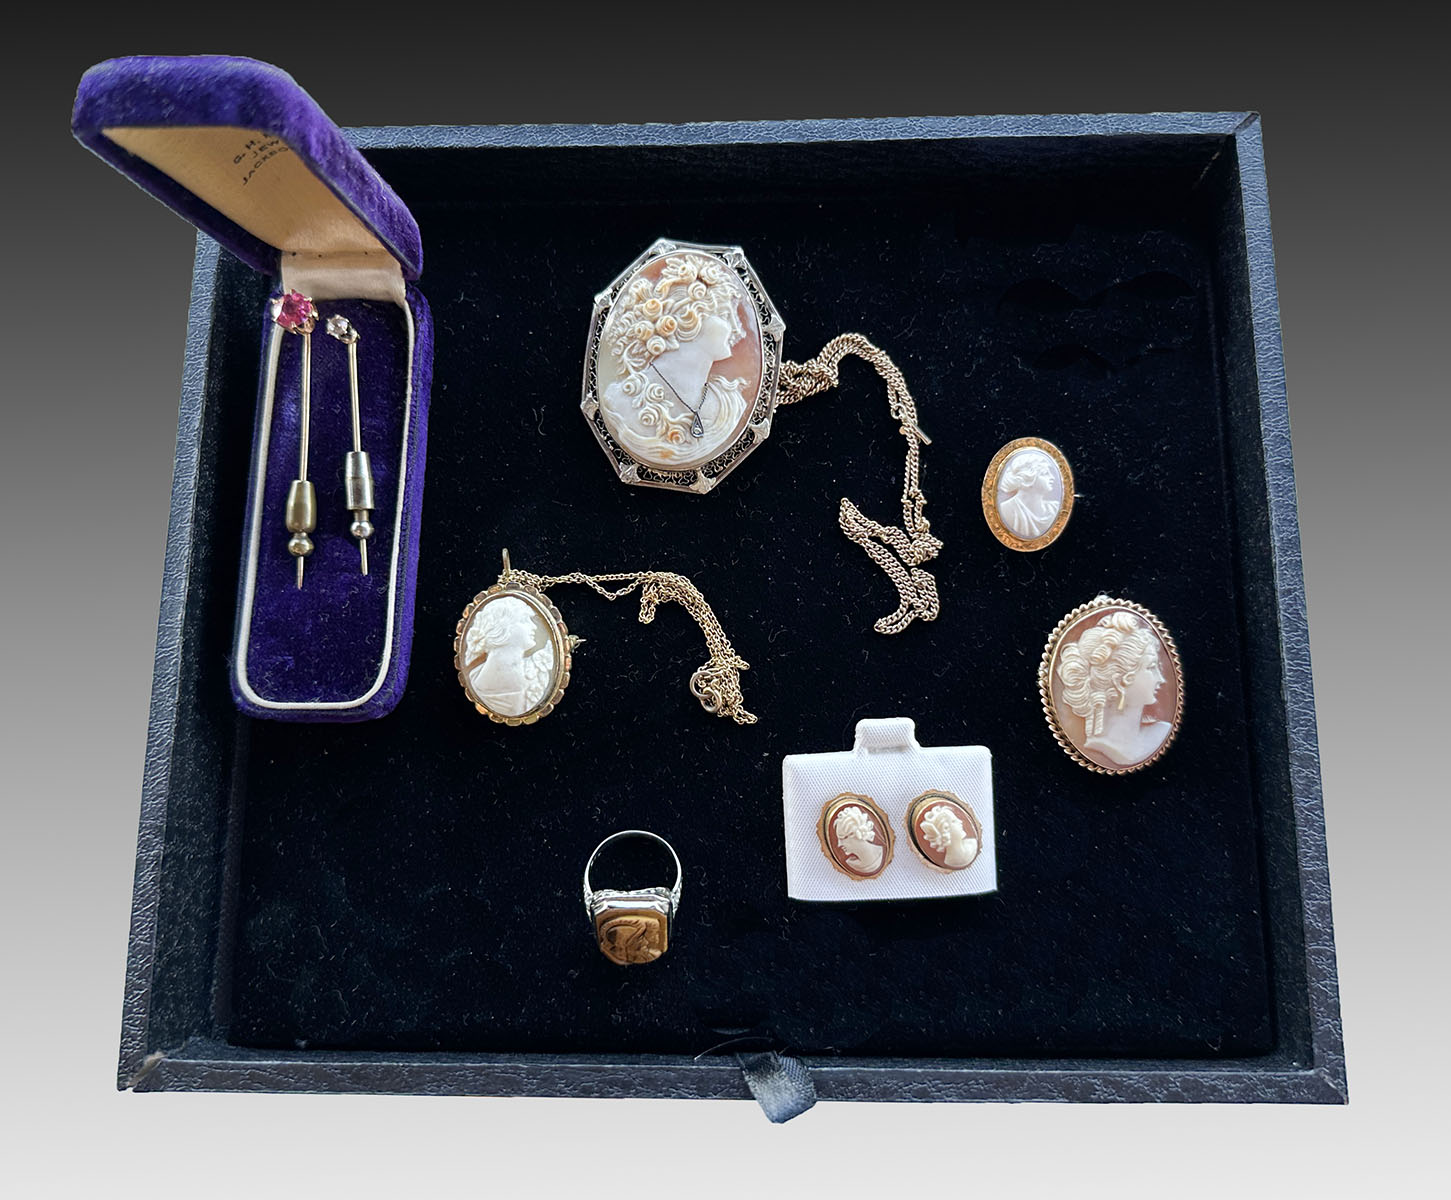 8PC GOLD CAMEO AND PIN LOT: Lot